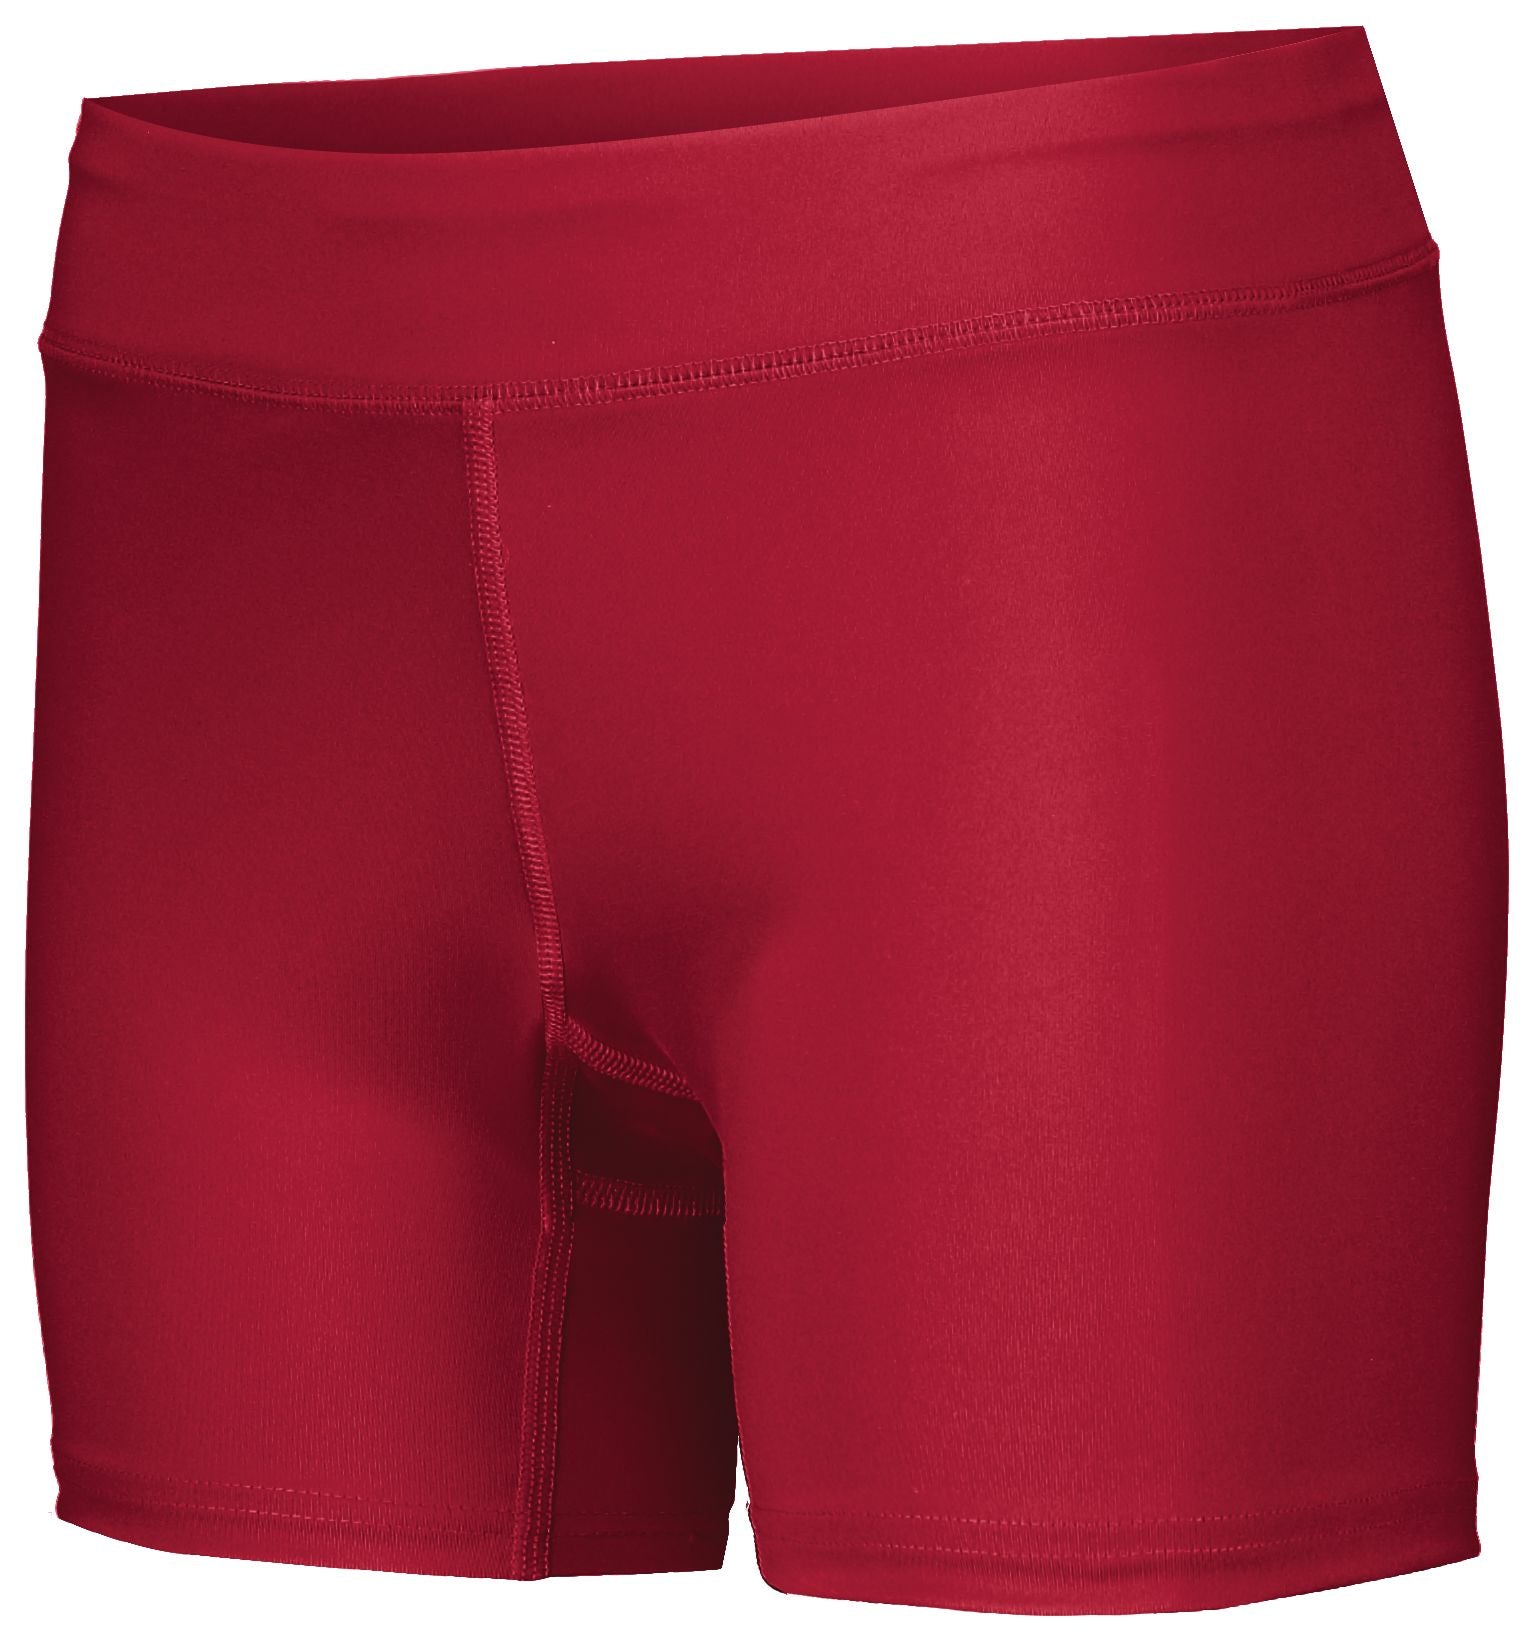 Holloway Ladies Pr Max Compression Shorts in Scarlet  -Part of the Ladies, Ladies-Shorts, Track-Field, Holloway product lines at KanaleyCreations.com